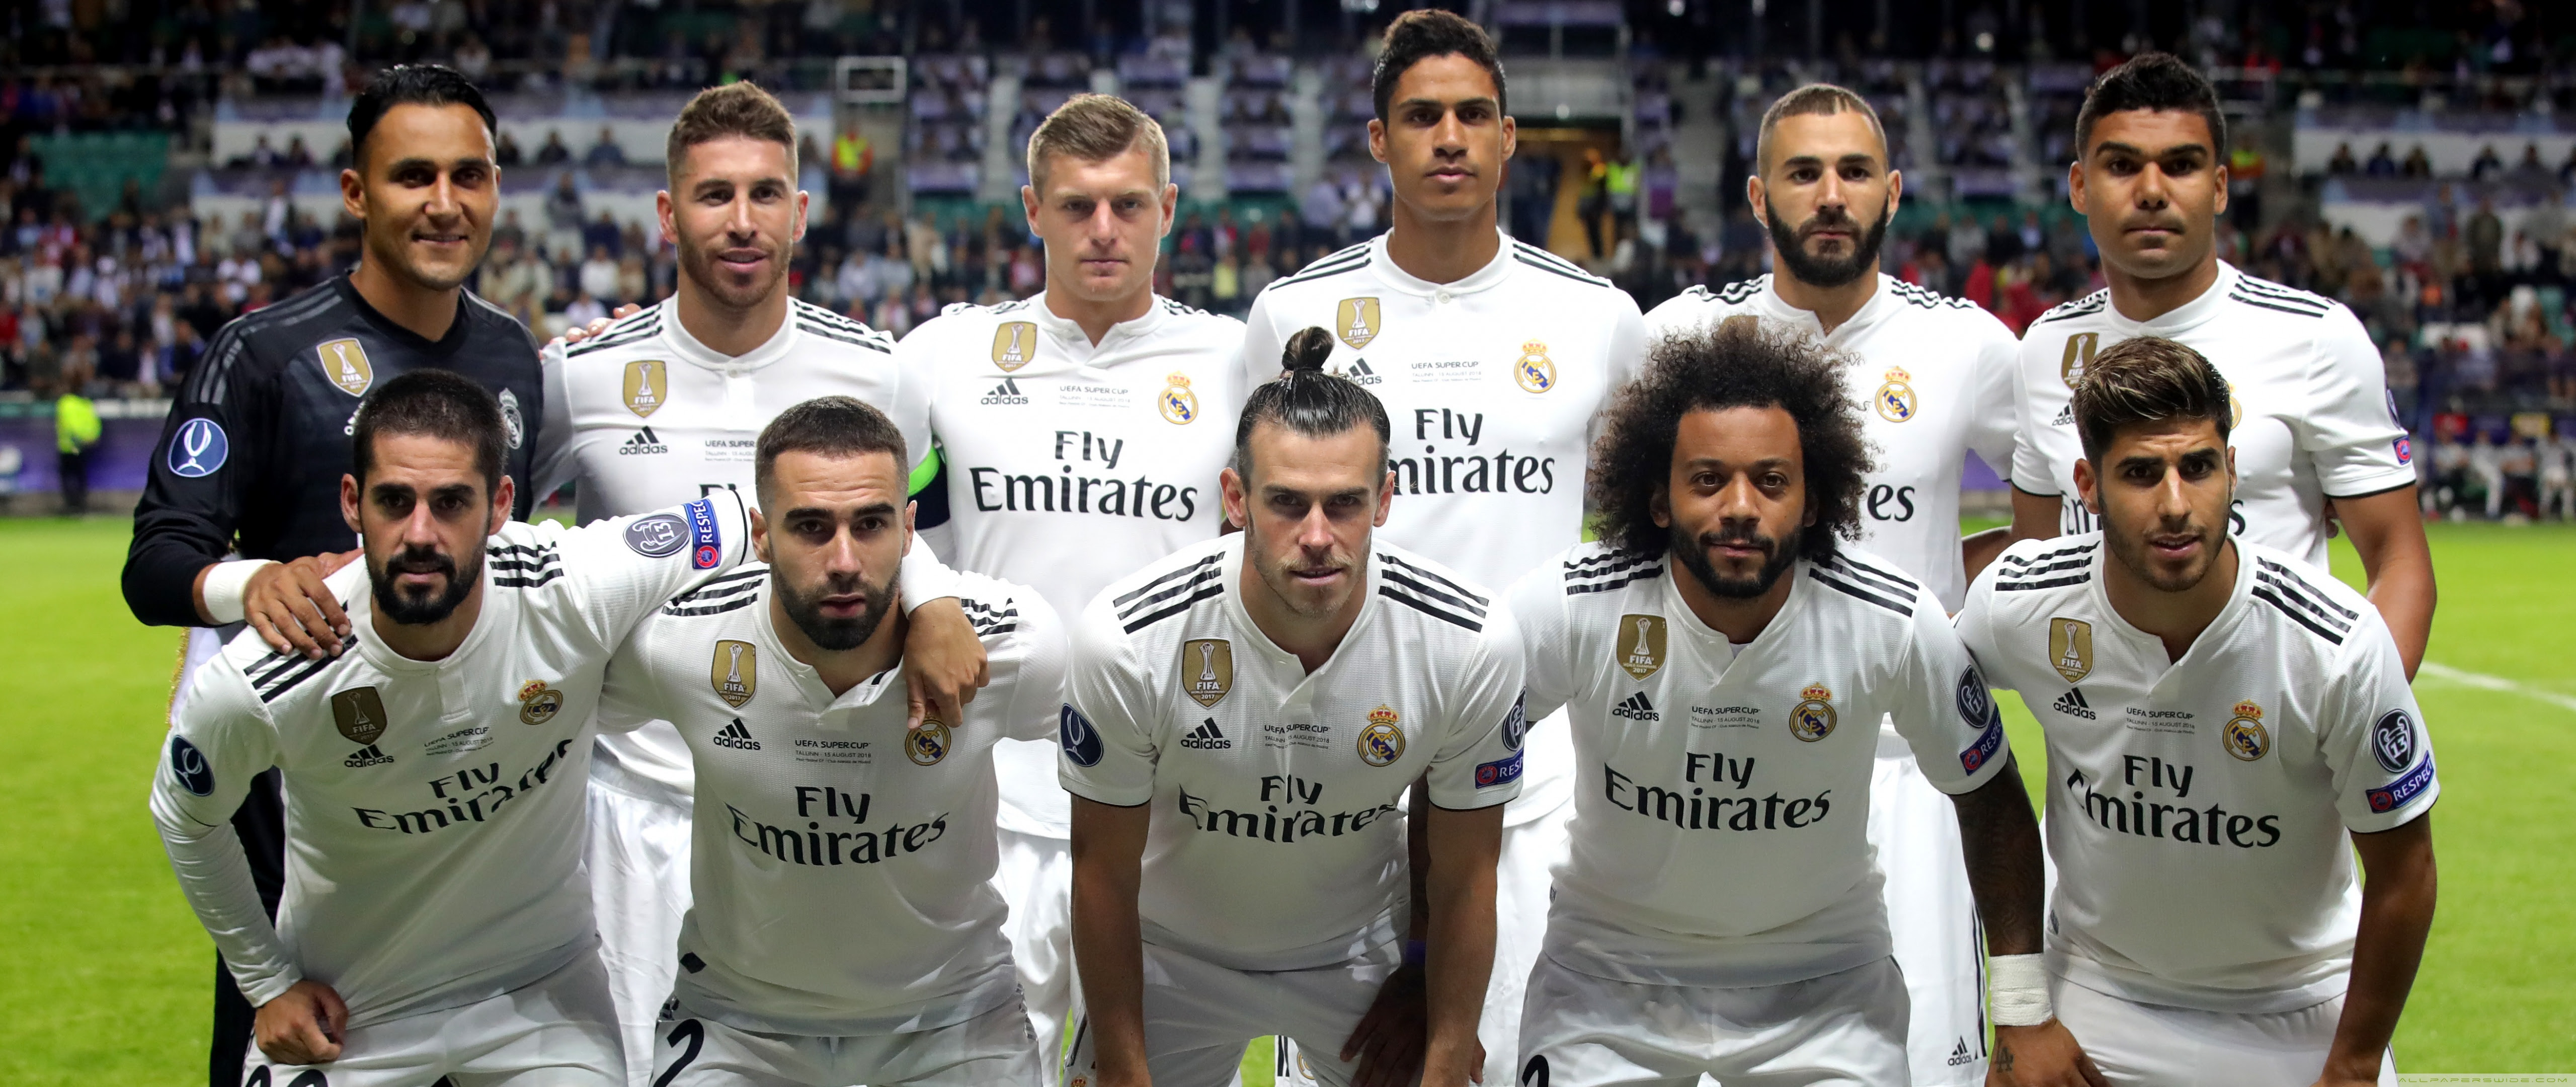 Wallpaper Huawei Real Madrid | WALLPAPER HD For Android